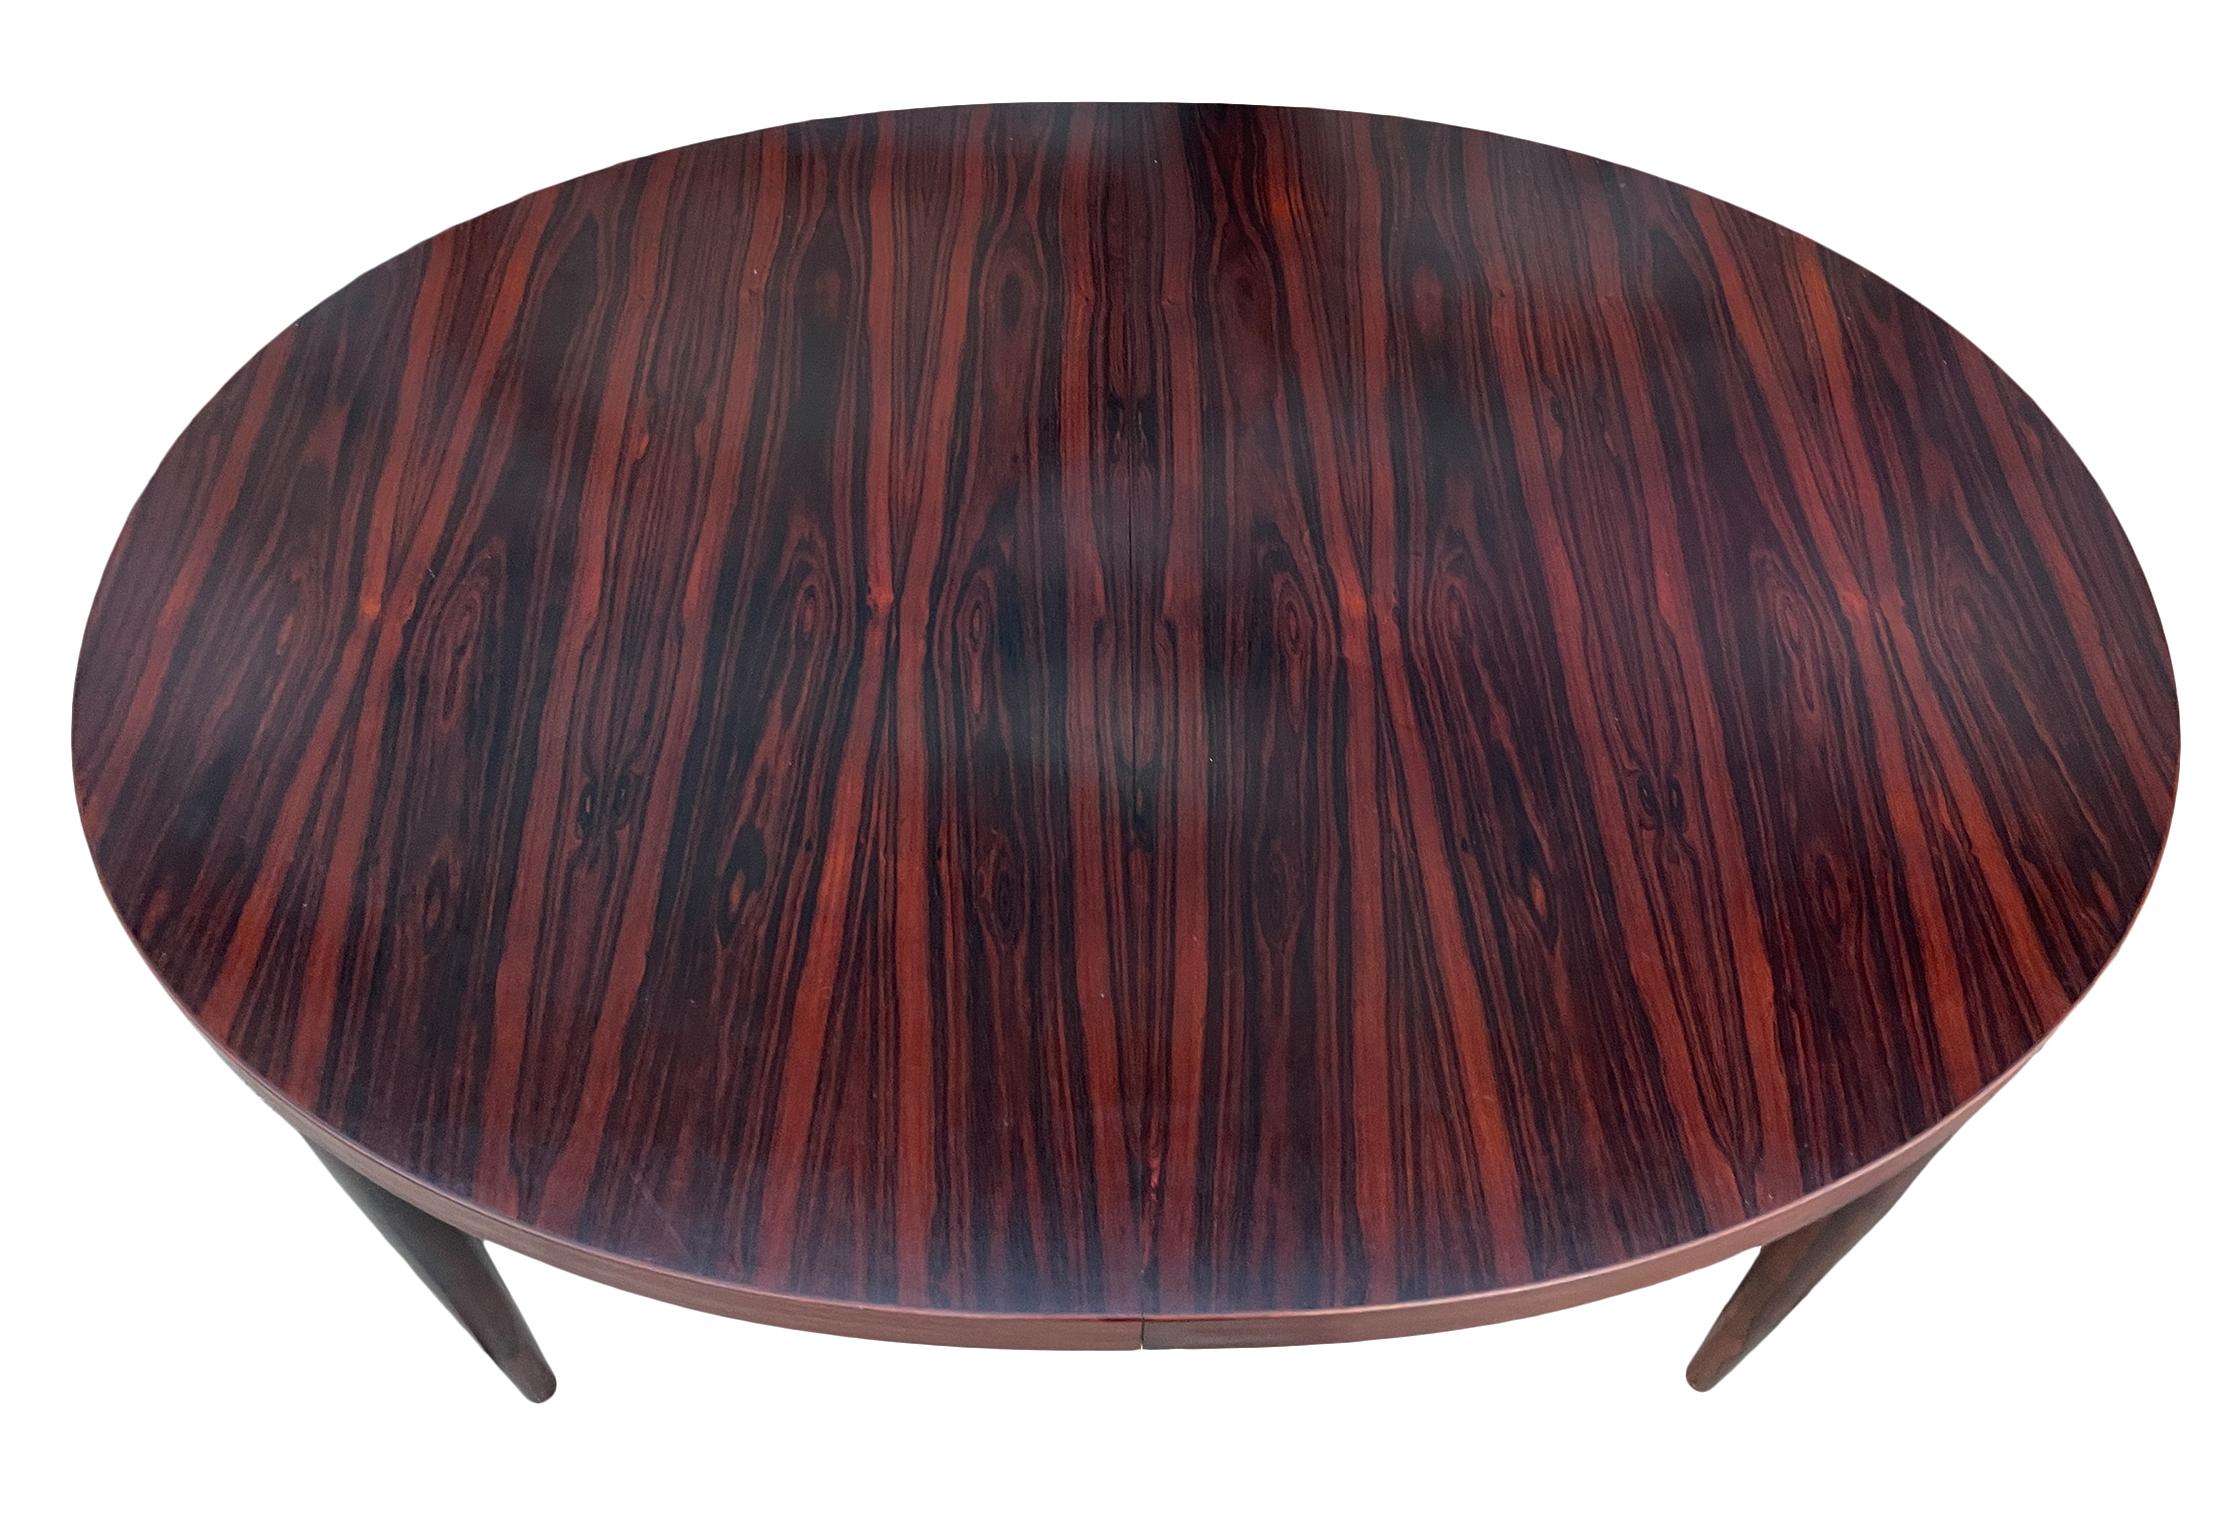 Stunning Mid century Exotic rosewood oval Danish Modern extension dining table with (2) leaves. This table has Solid rosewood tapered wood legs. This table is in beautiful condition with Dark black and reddish rosewood tones very Magical Table.